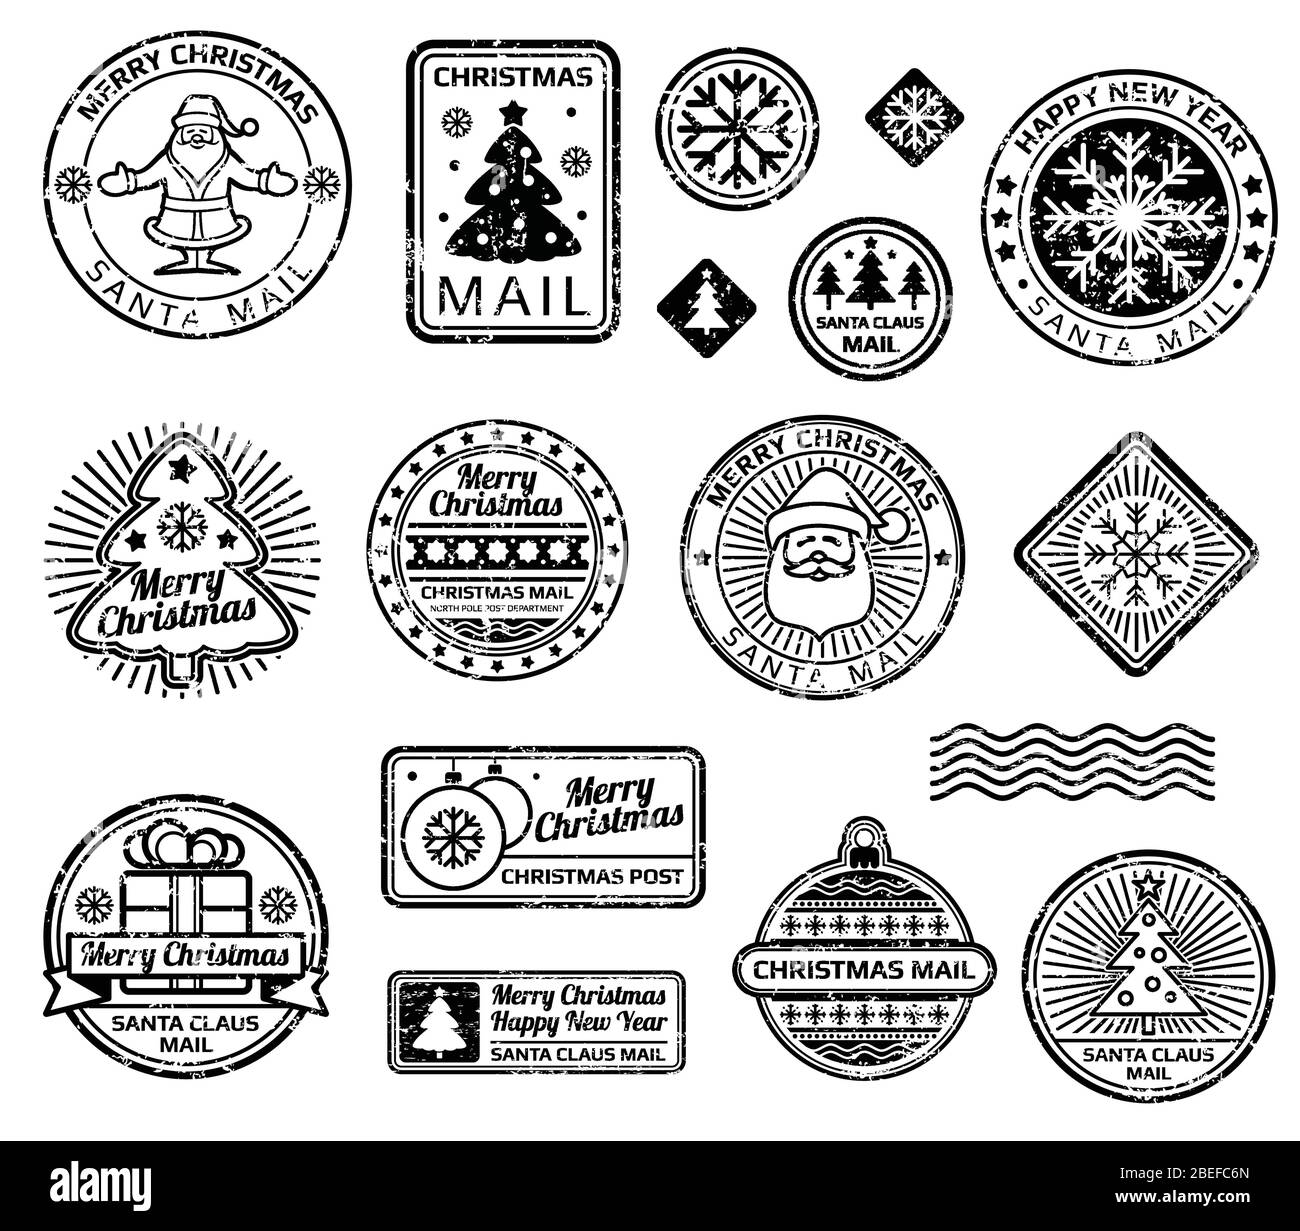 Vintage christmas postage stamps vector set. Christmas black stamp, xmas and new year illustration Stock Vector